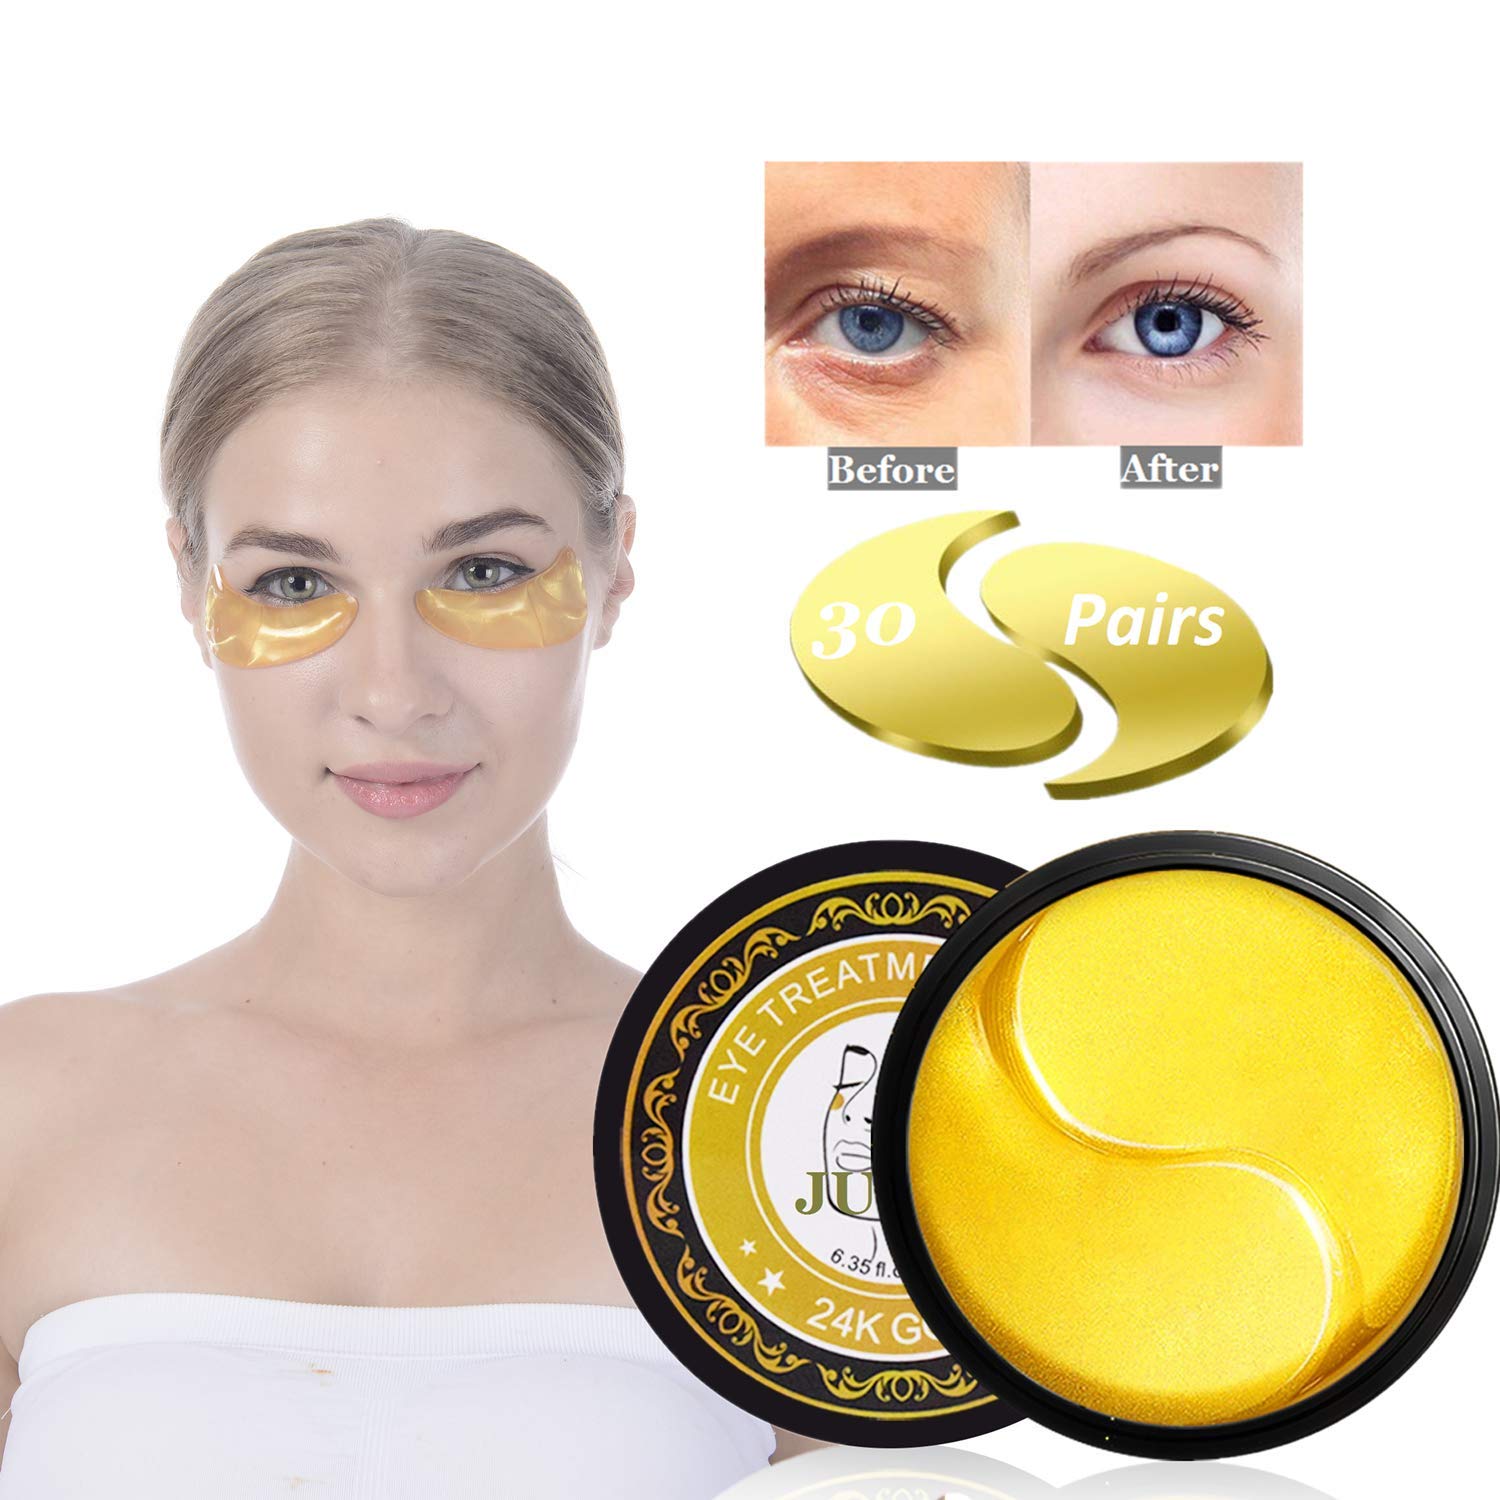 Book Cover Under Eye Patches, JUYOU 24K Gold Eye Mask, Eye Gel Pads Collagen Eye Treatment Masks Reduces Wrinkles and Puffiness Lighten Dark Circles Moisturizing and Anti Aging, 60 Pieces